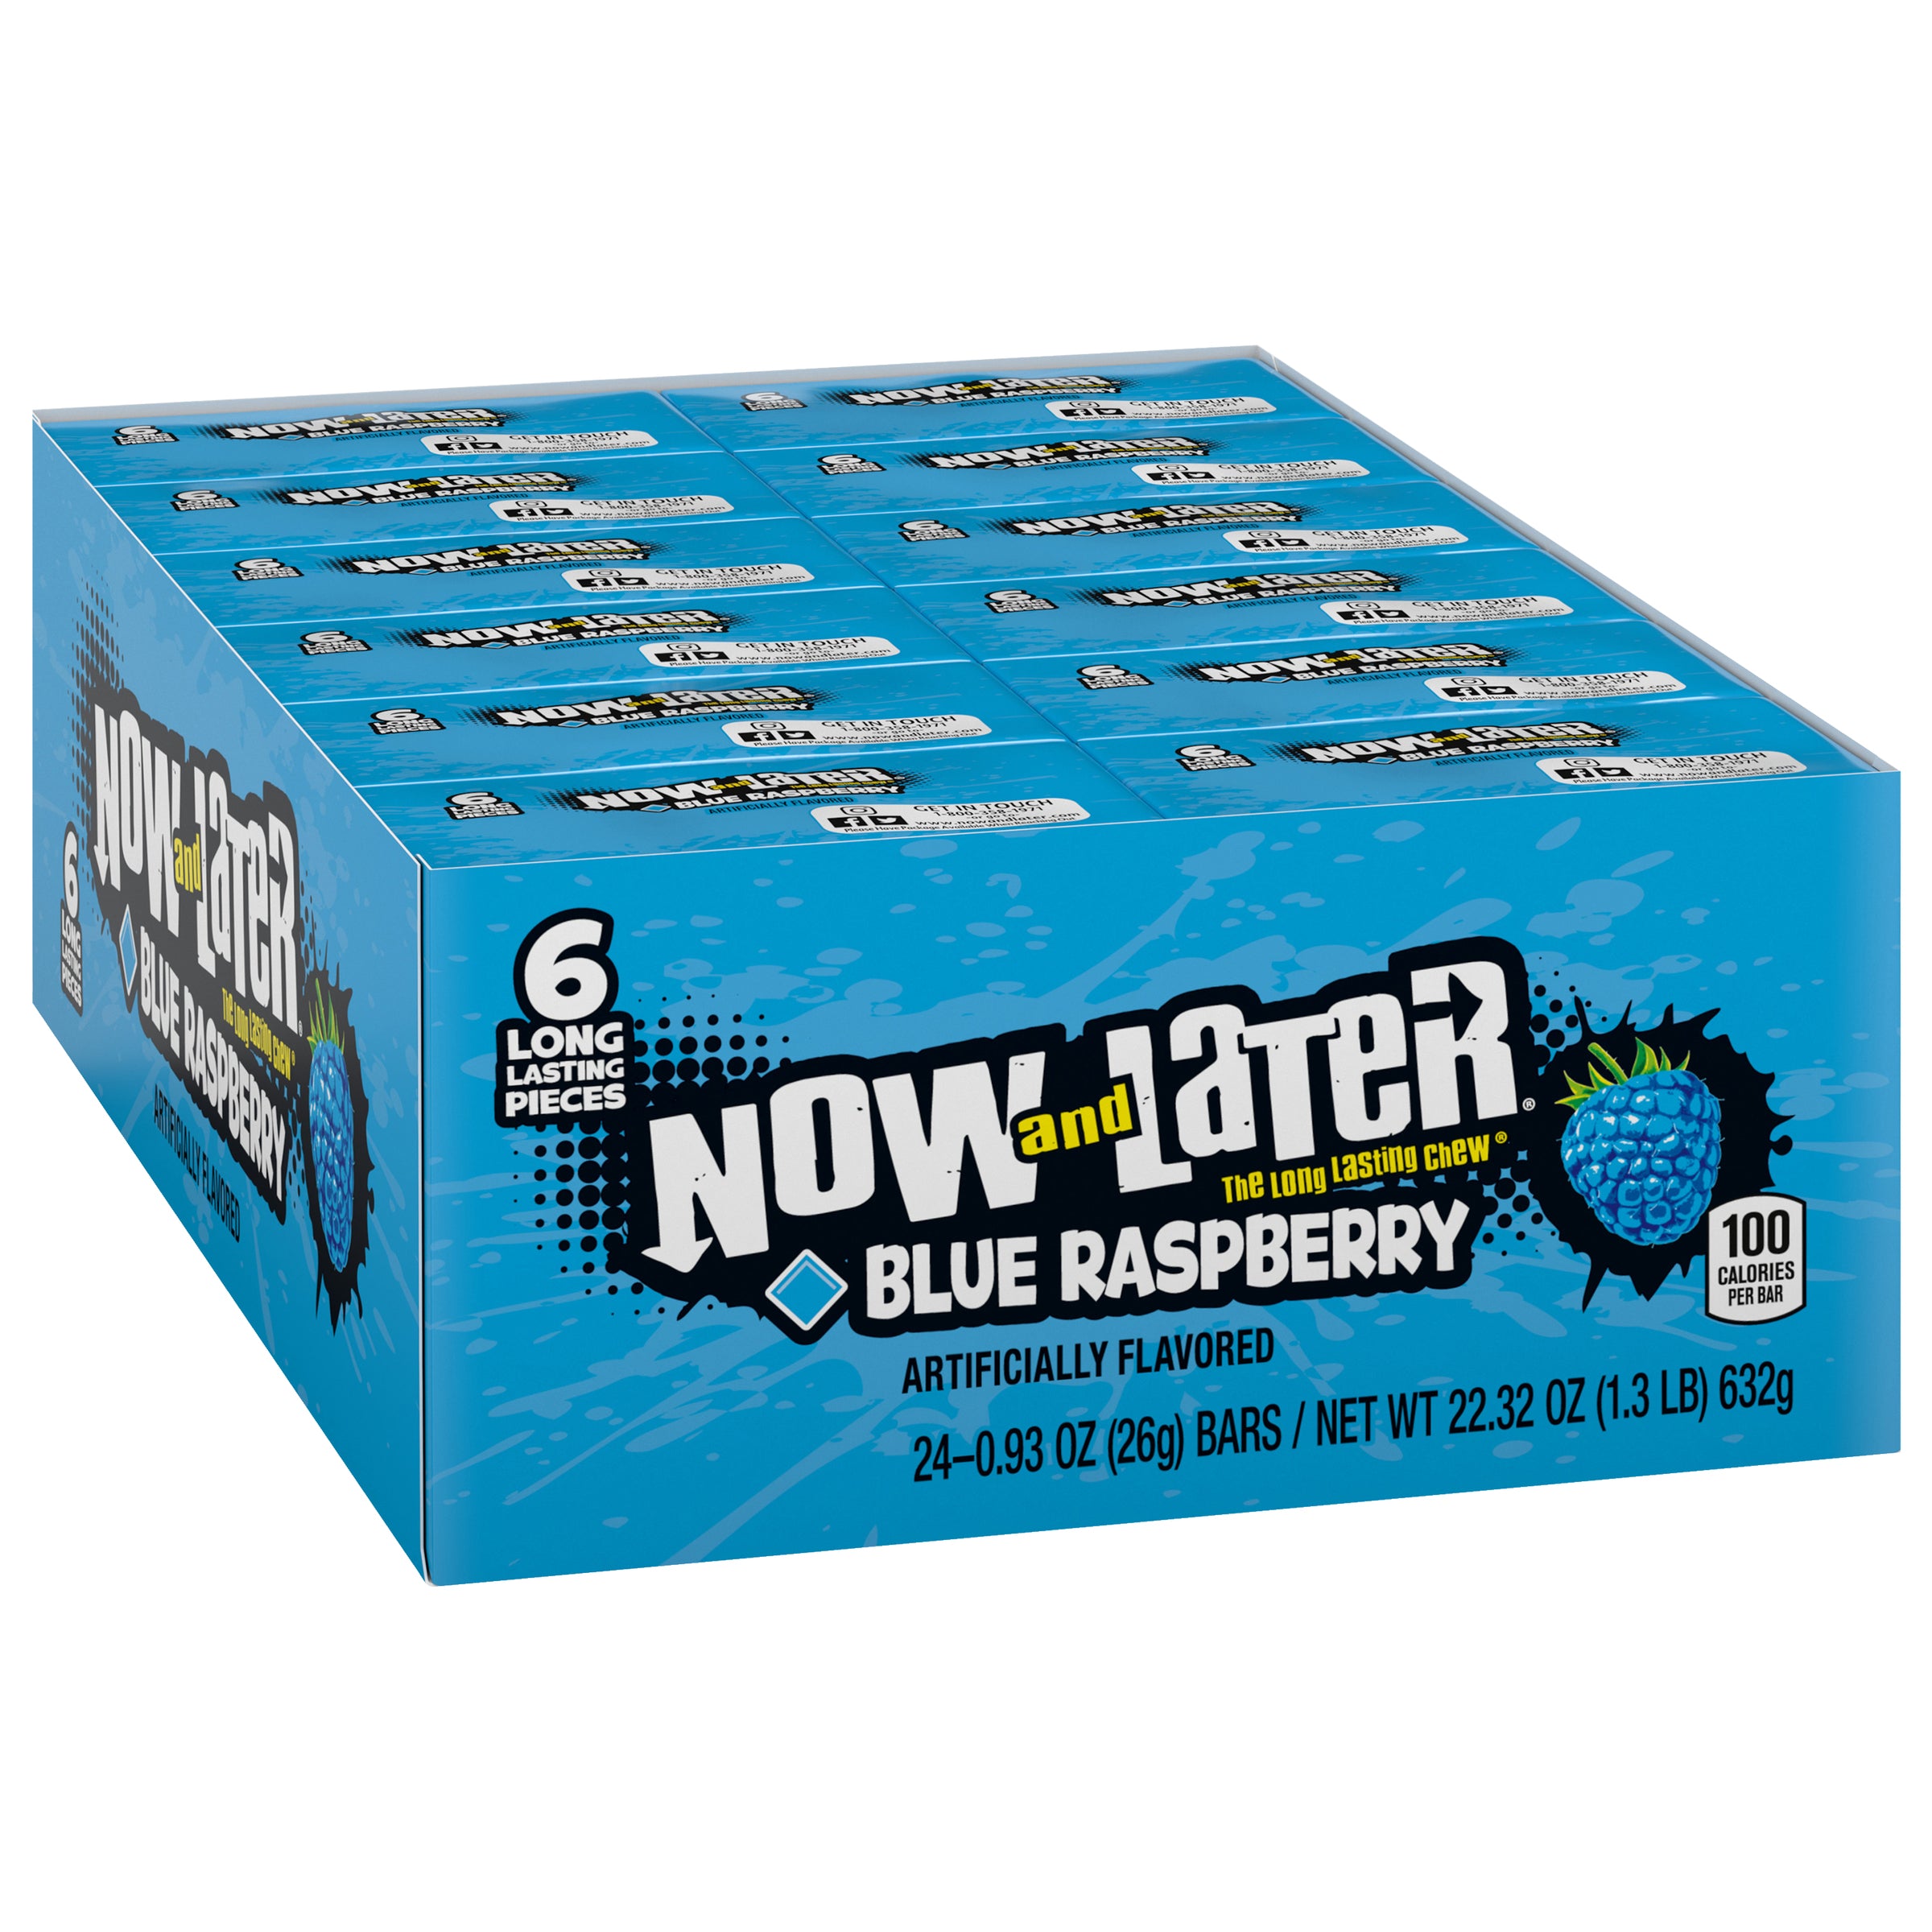 NOW AND LATER - BLUE RASPBERRY